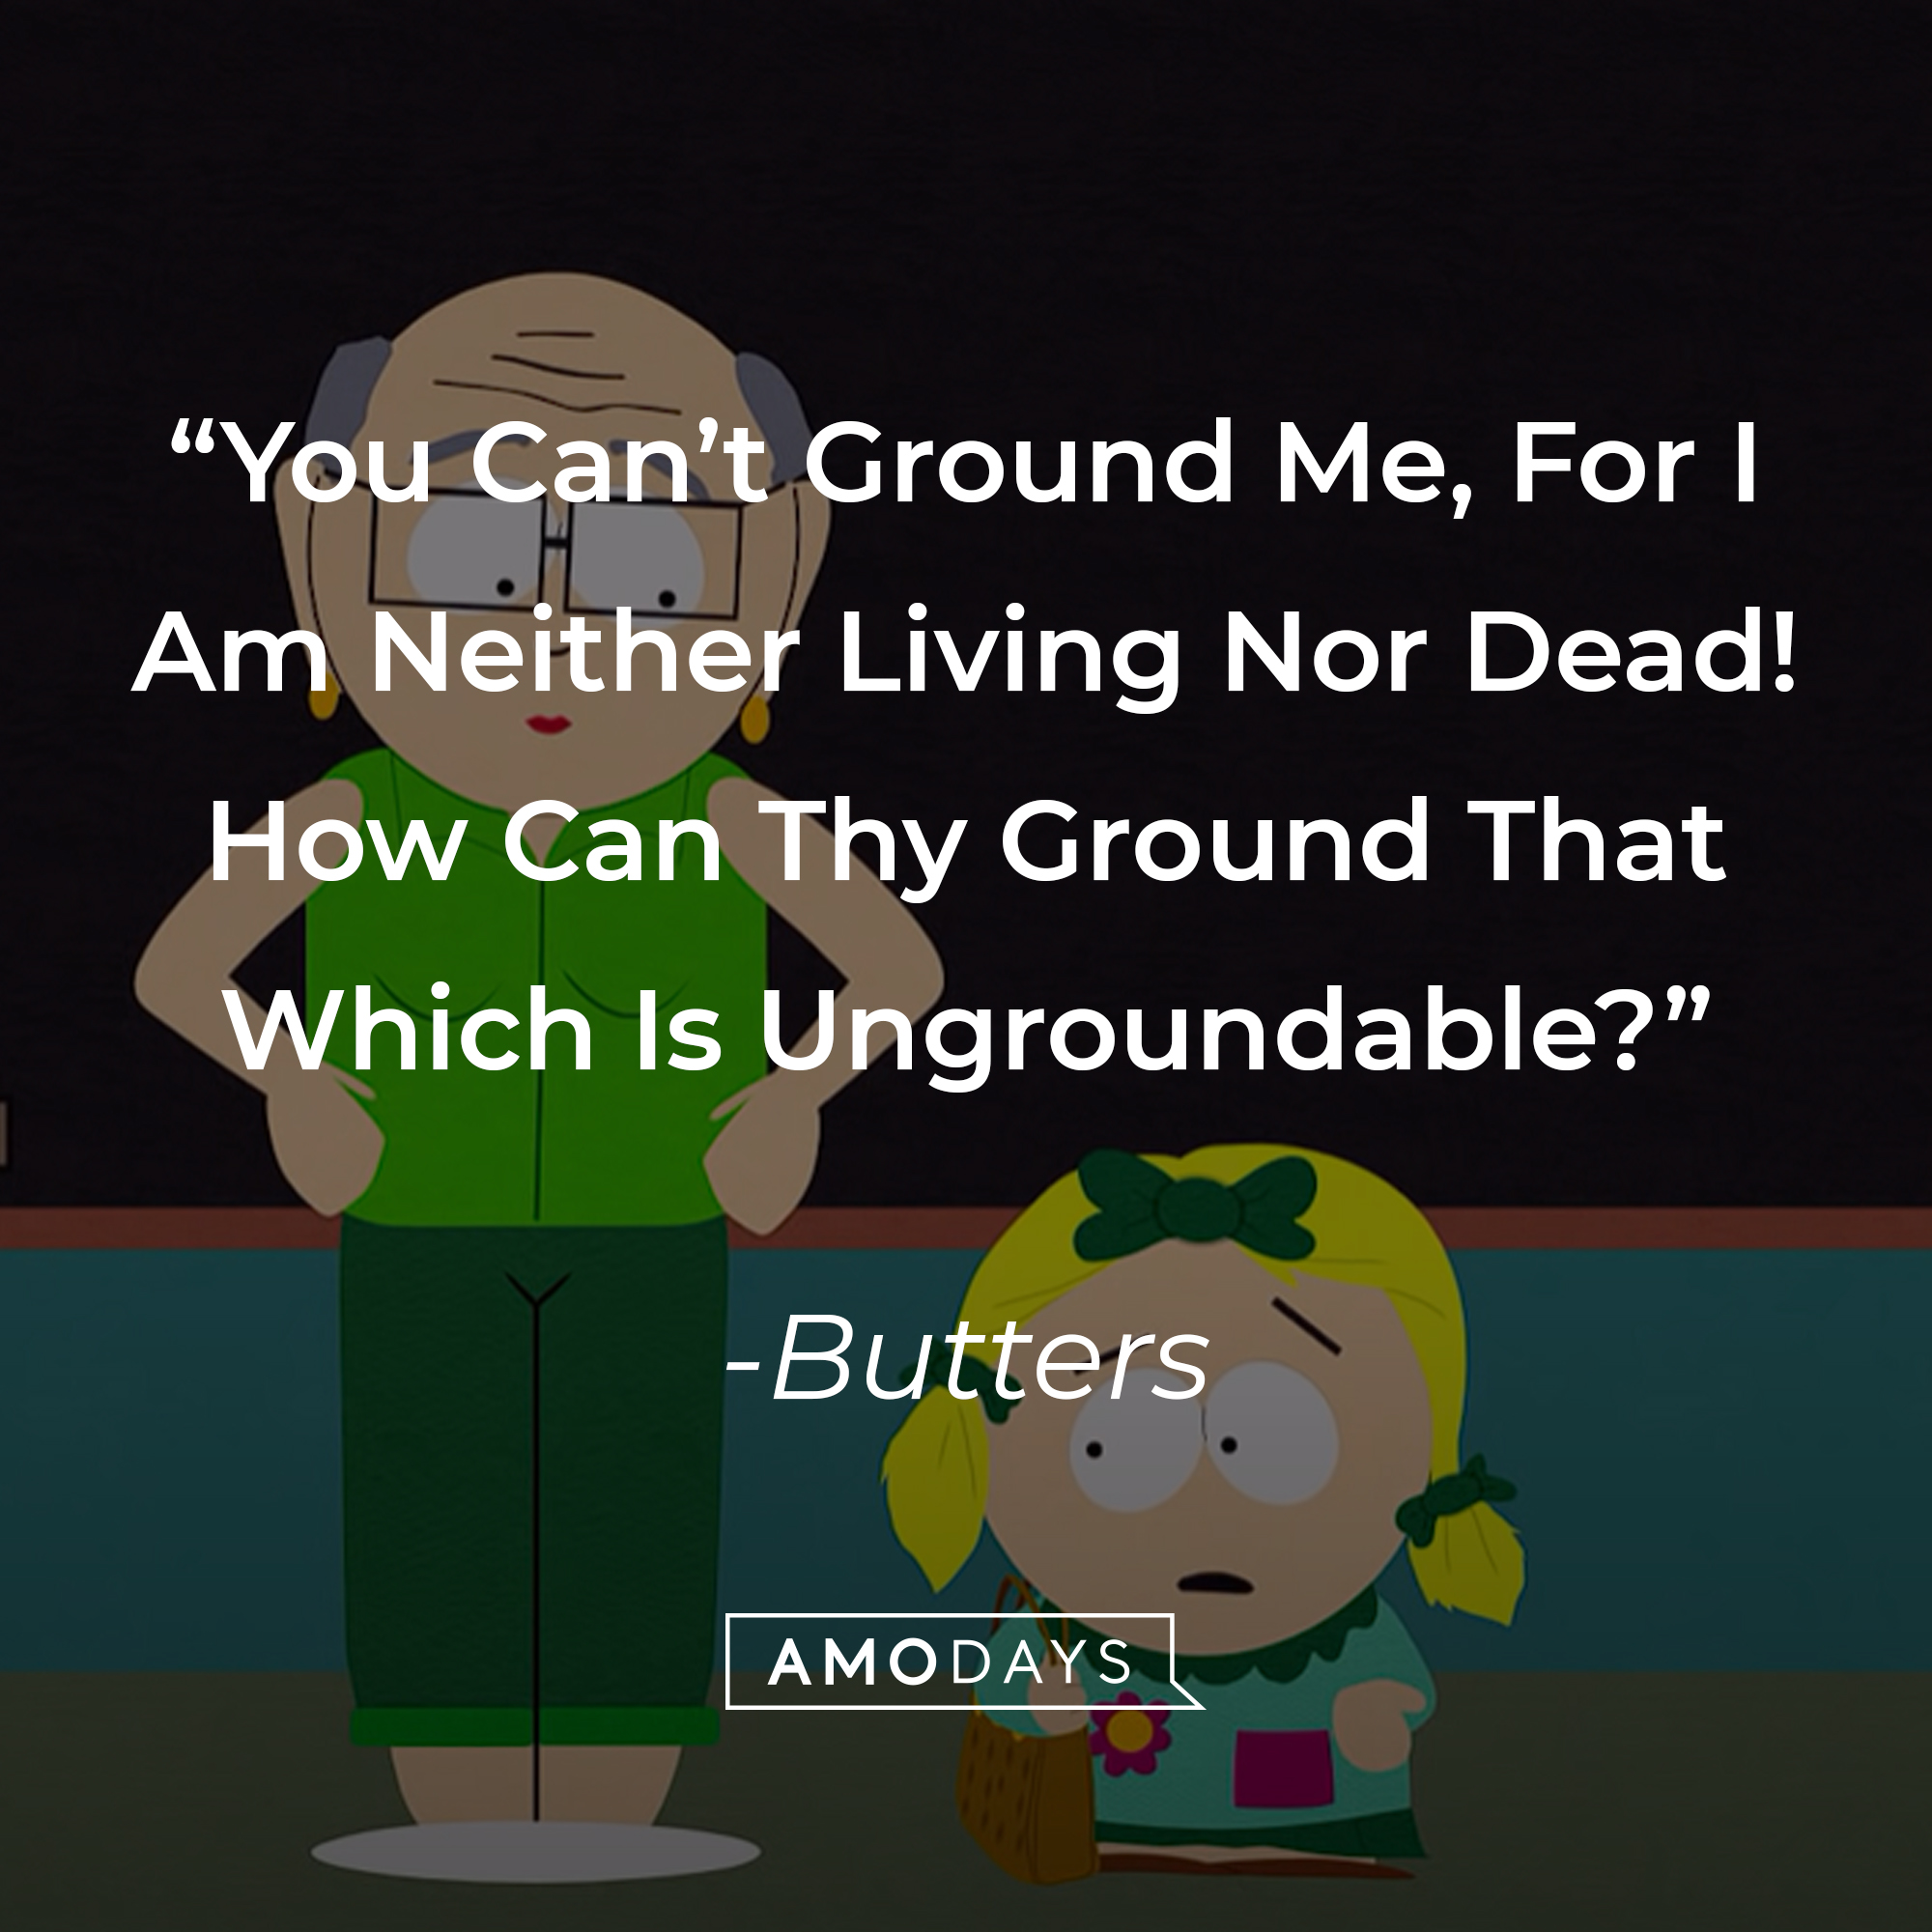 Butters' quote: "You Can't Ground Me, For I Am Neither Living Nor Dead How Can Thy Ground That Which Is Ungroundable?" | Source: youtube.com/southpark